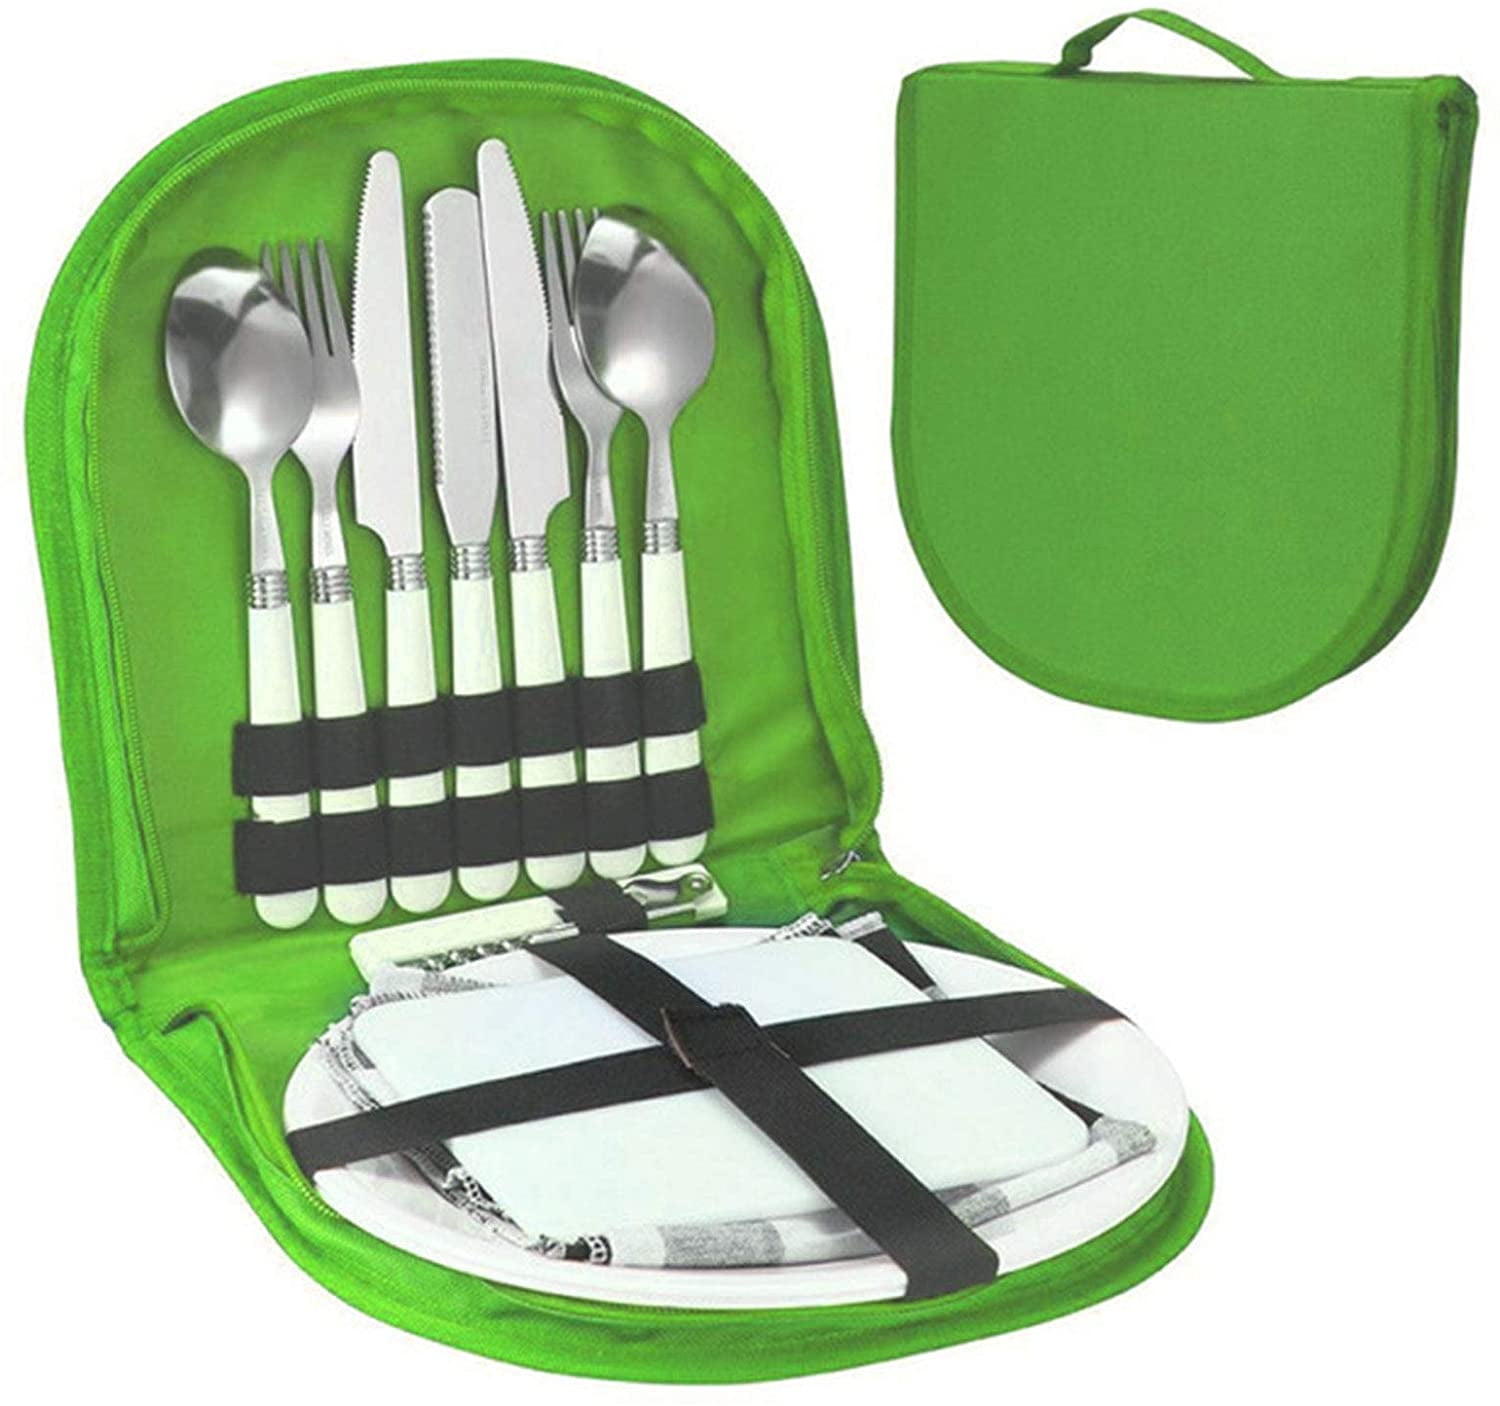 ArderLive 3 PCS Outdoor Flatware Set with Case, Fork Spoon Knife/Travel Set  for Travel, Lunch Box and Camping, father's day gifts, Blue